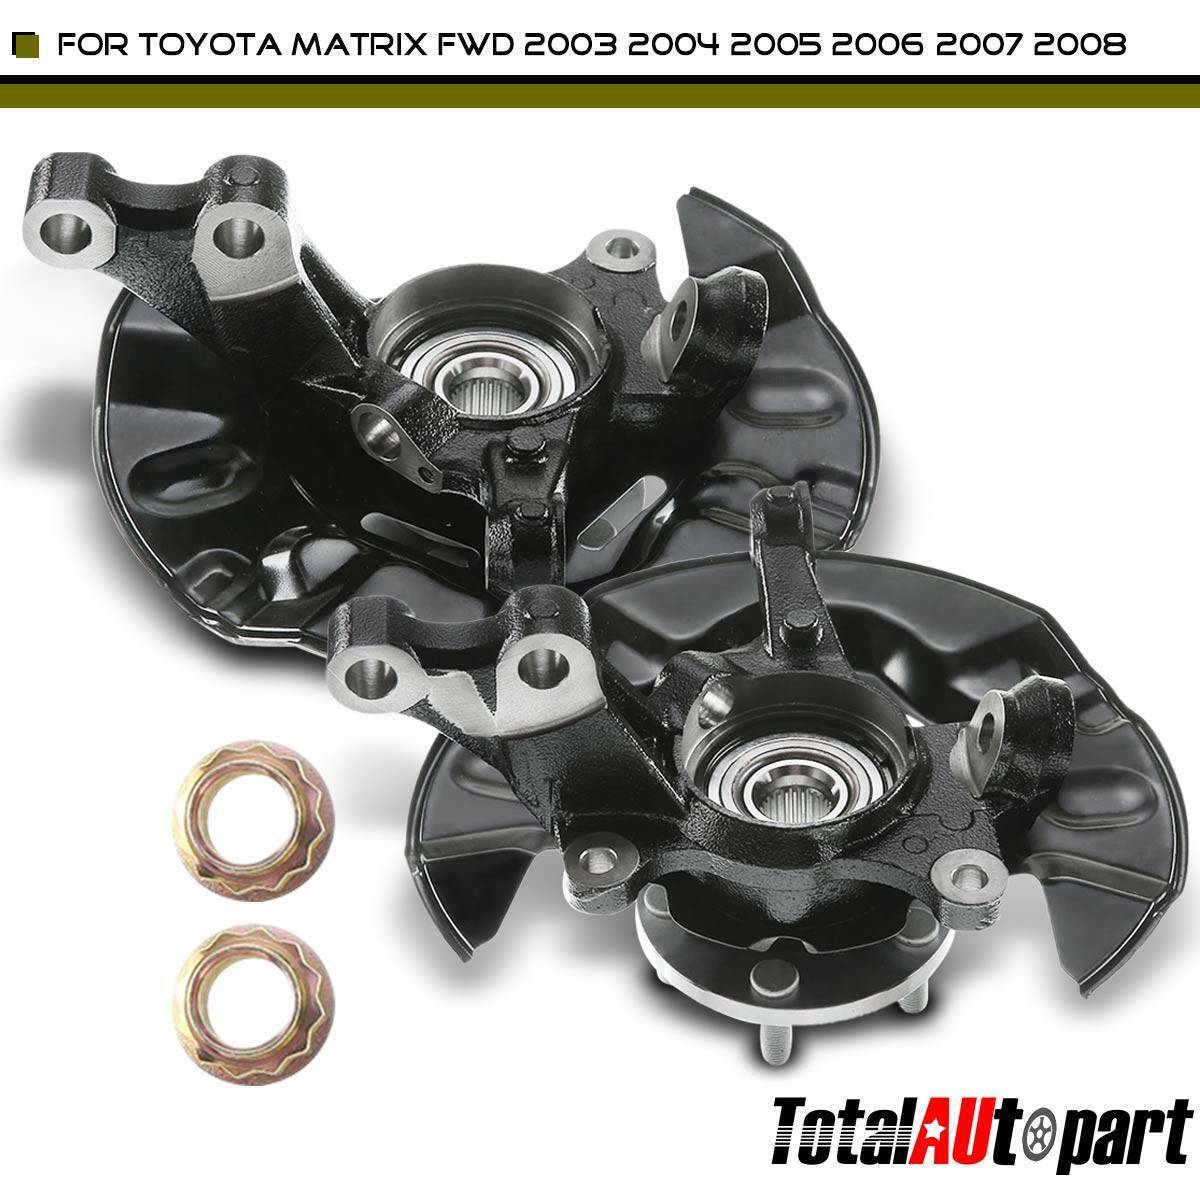 2 Wheel Bearing Hub Knuckle Assembly Front Steel for Toyota Matrix 2003-2008 FWD